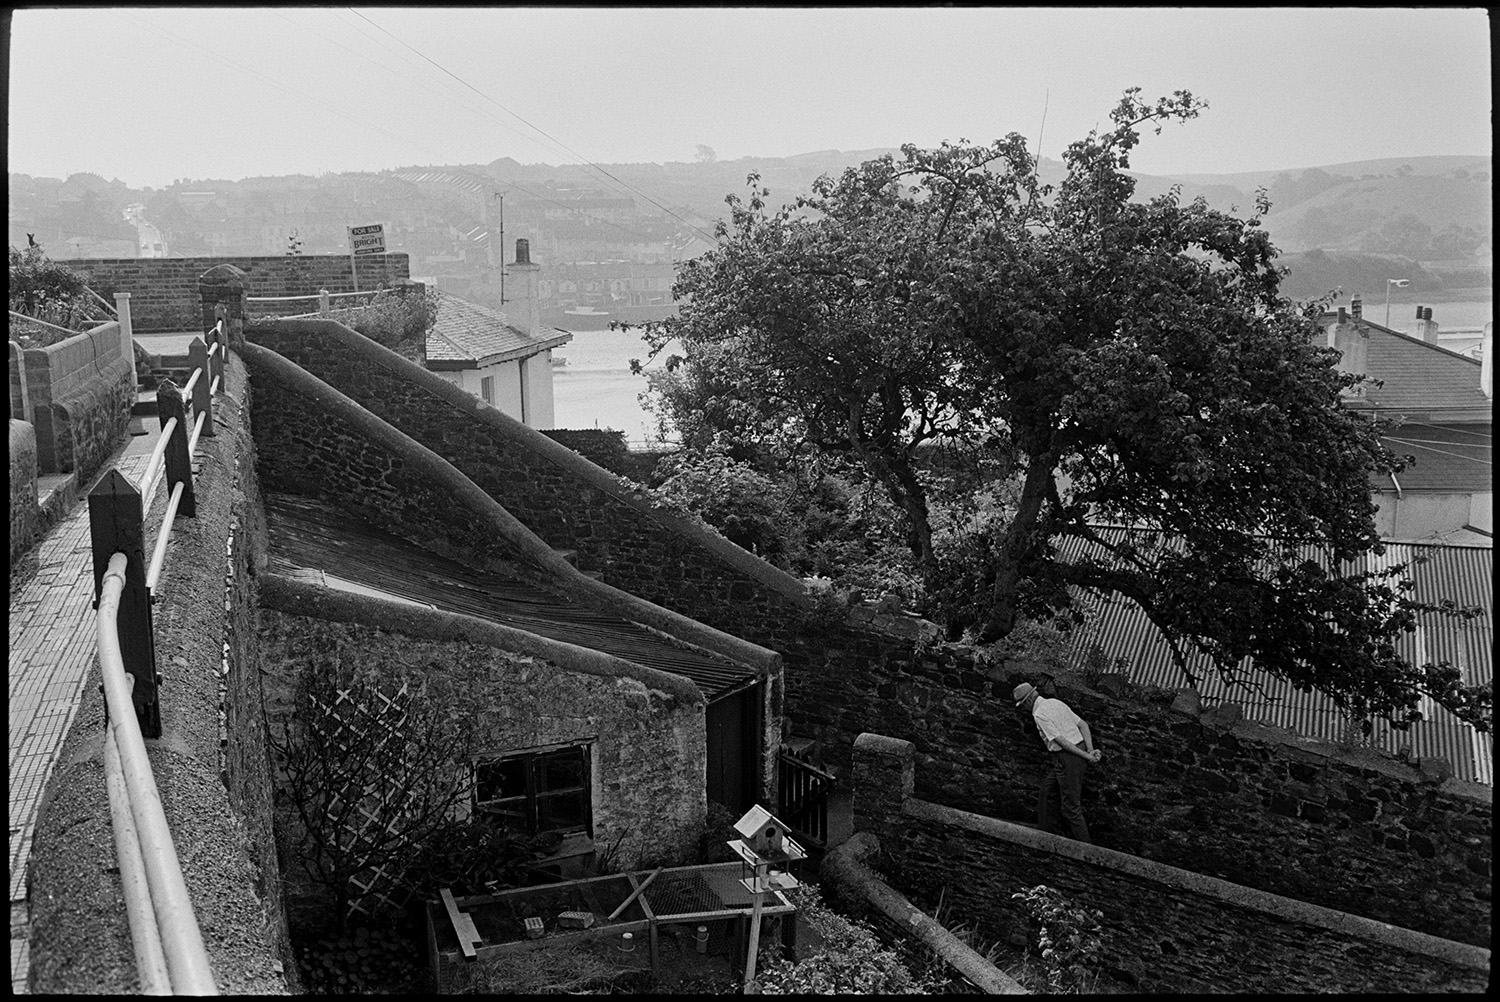 Walled path between gardens. 
[A man walking along a walled path between gardens at Bideford. A tree and corrugated iron roof can be seen behind one of the walls and the River Torridge is visible in the background. A hutch and bird table are visible in the garden in the foreground.]